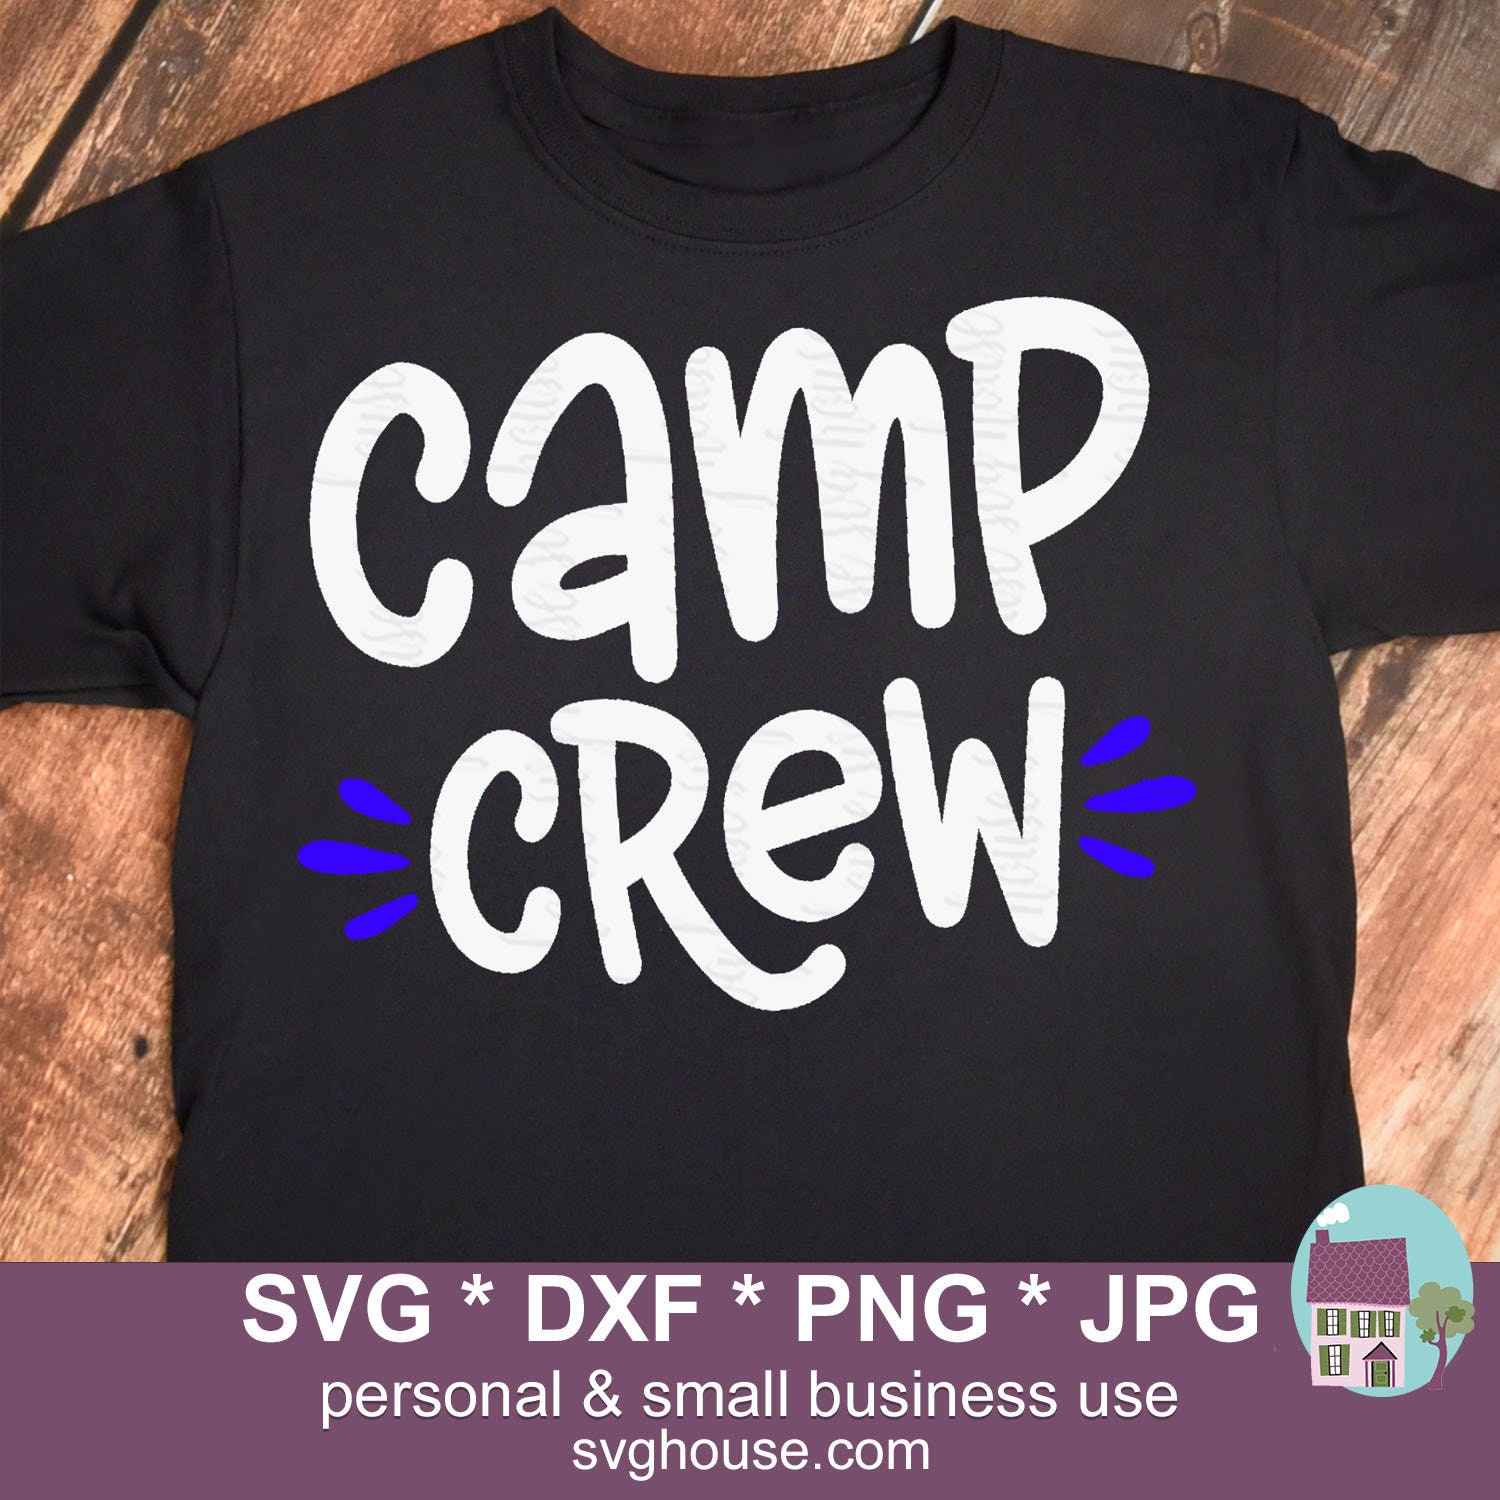 Summer Camp Shirt Ideas: Get Creative with These Must-See Designs!